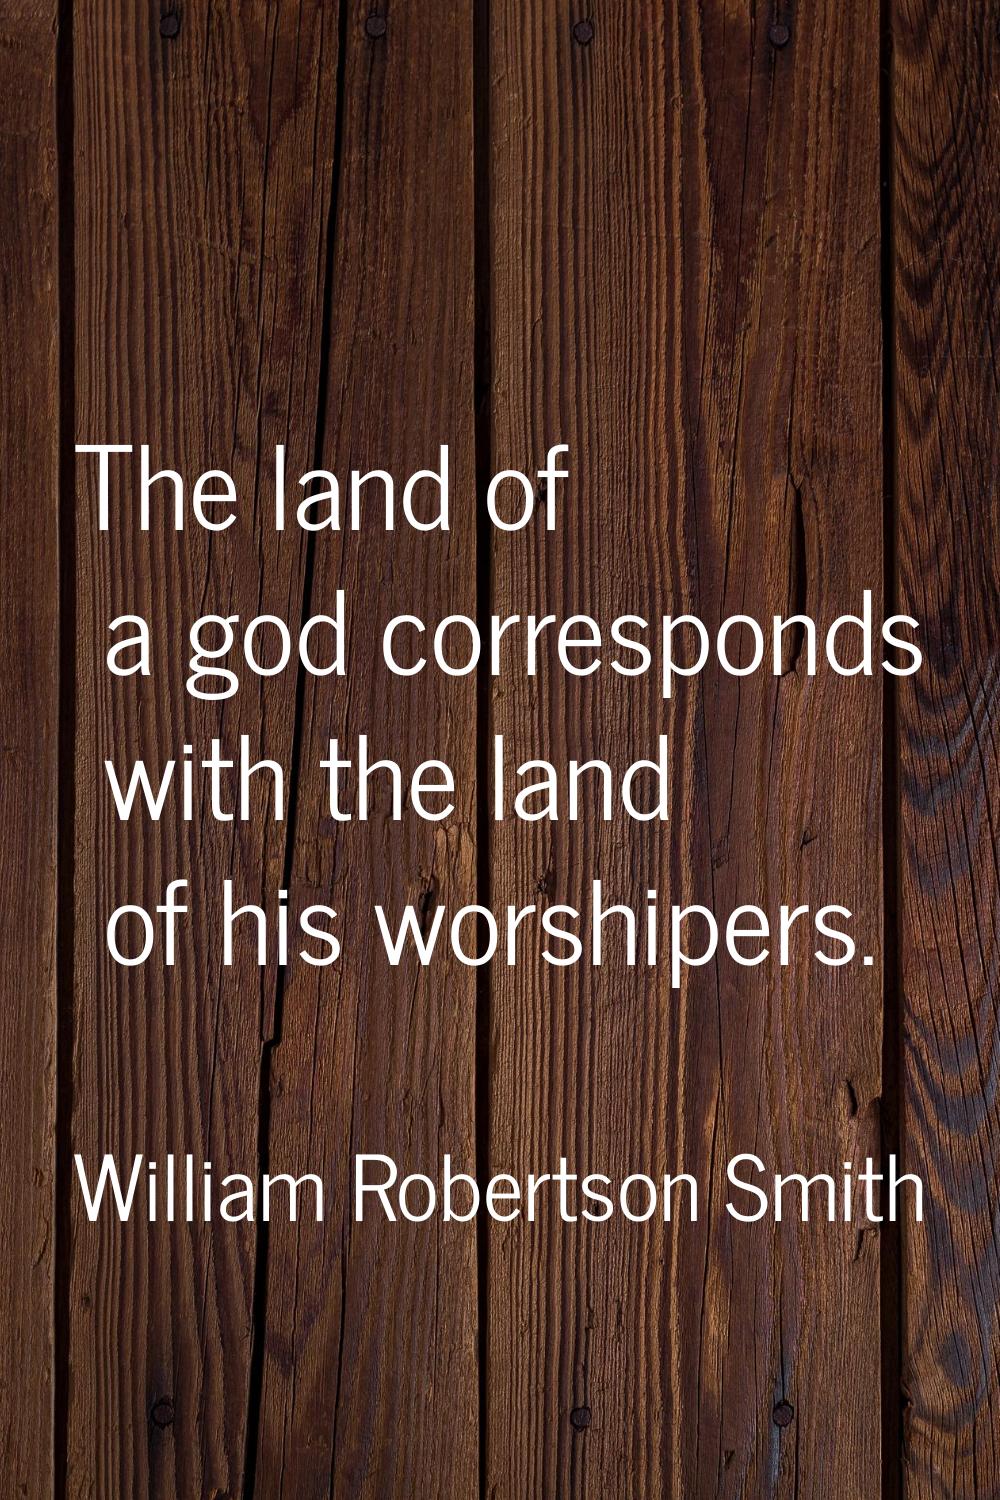 The land of a god corresponds with the land of his worshipers.